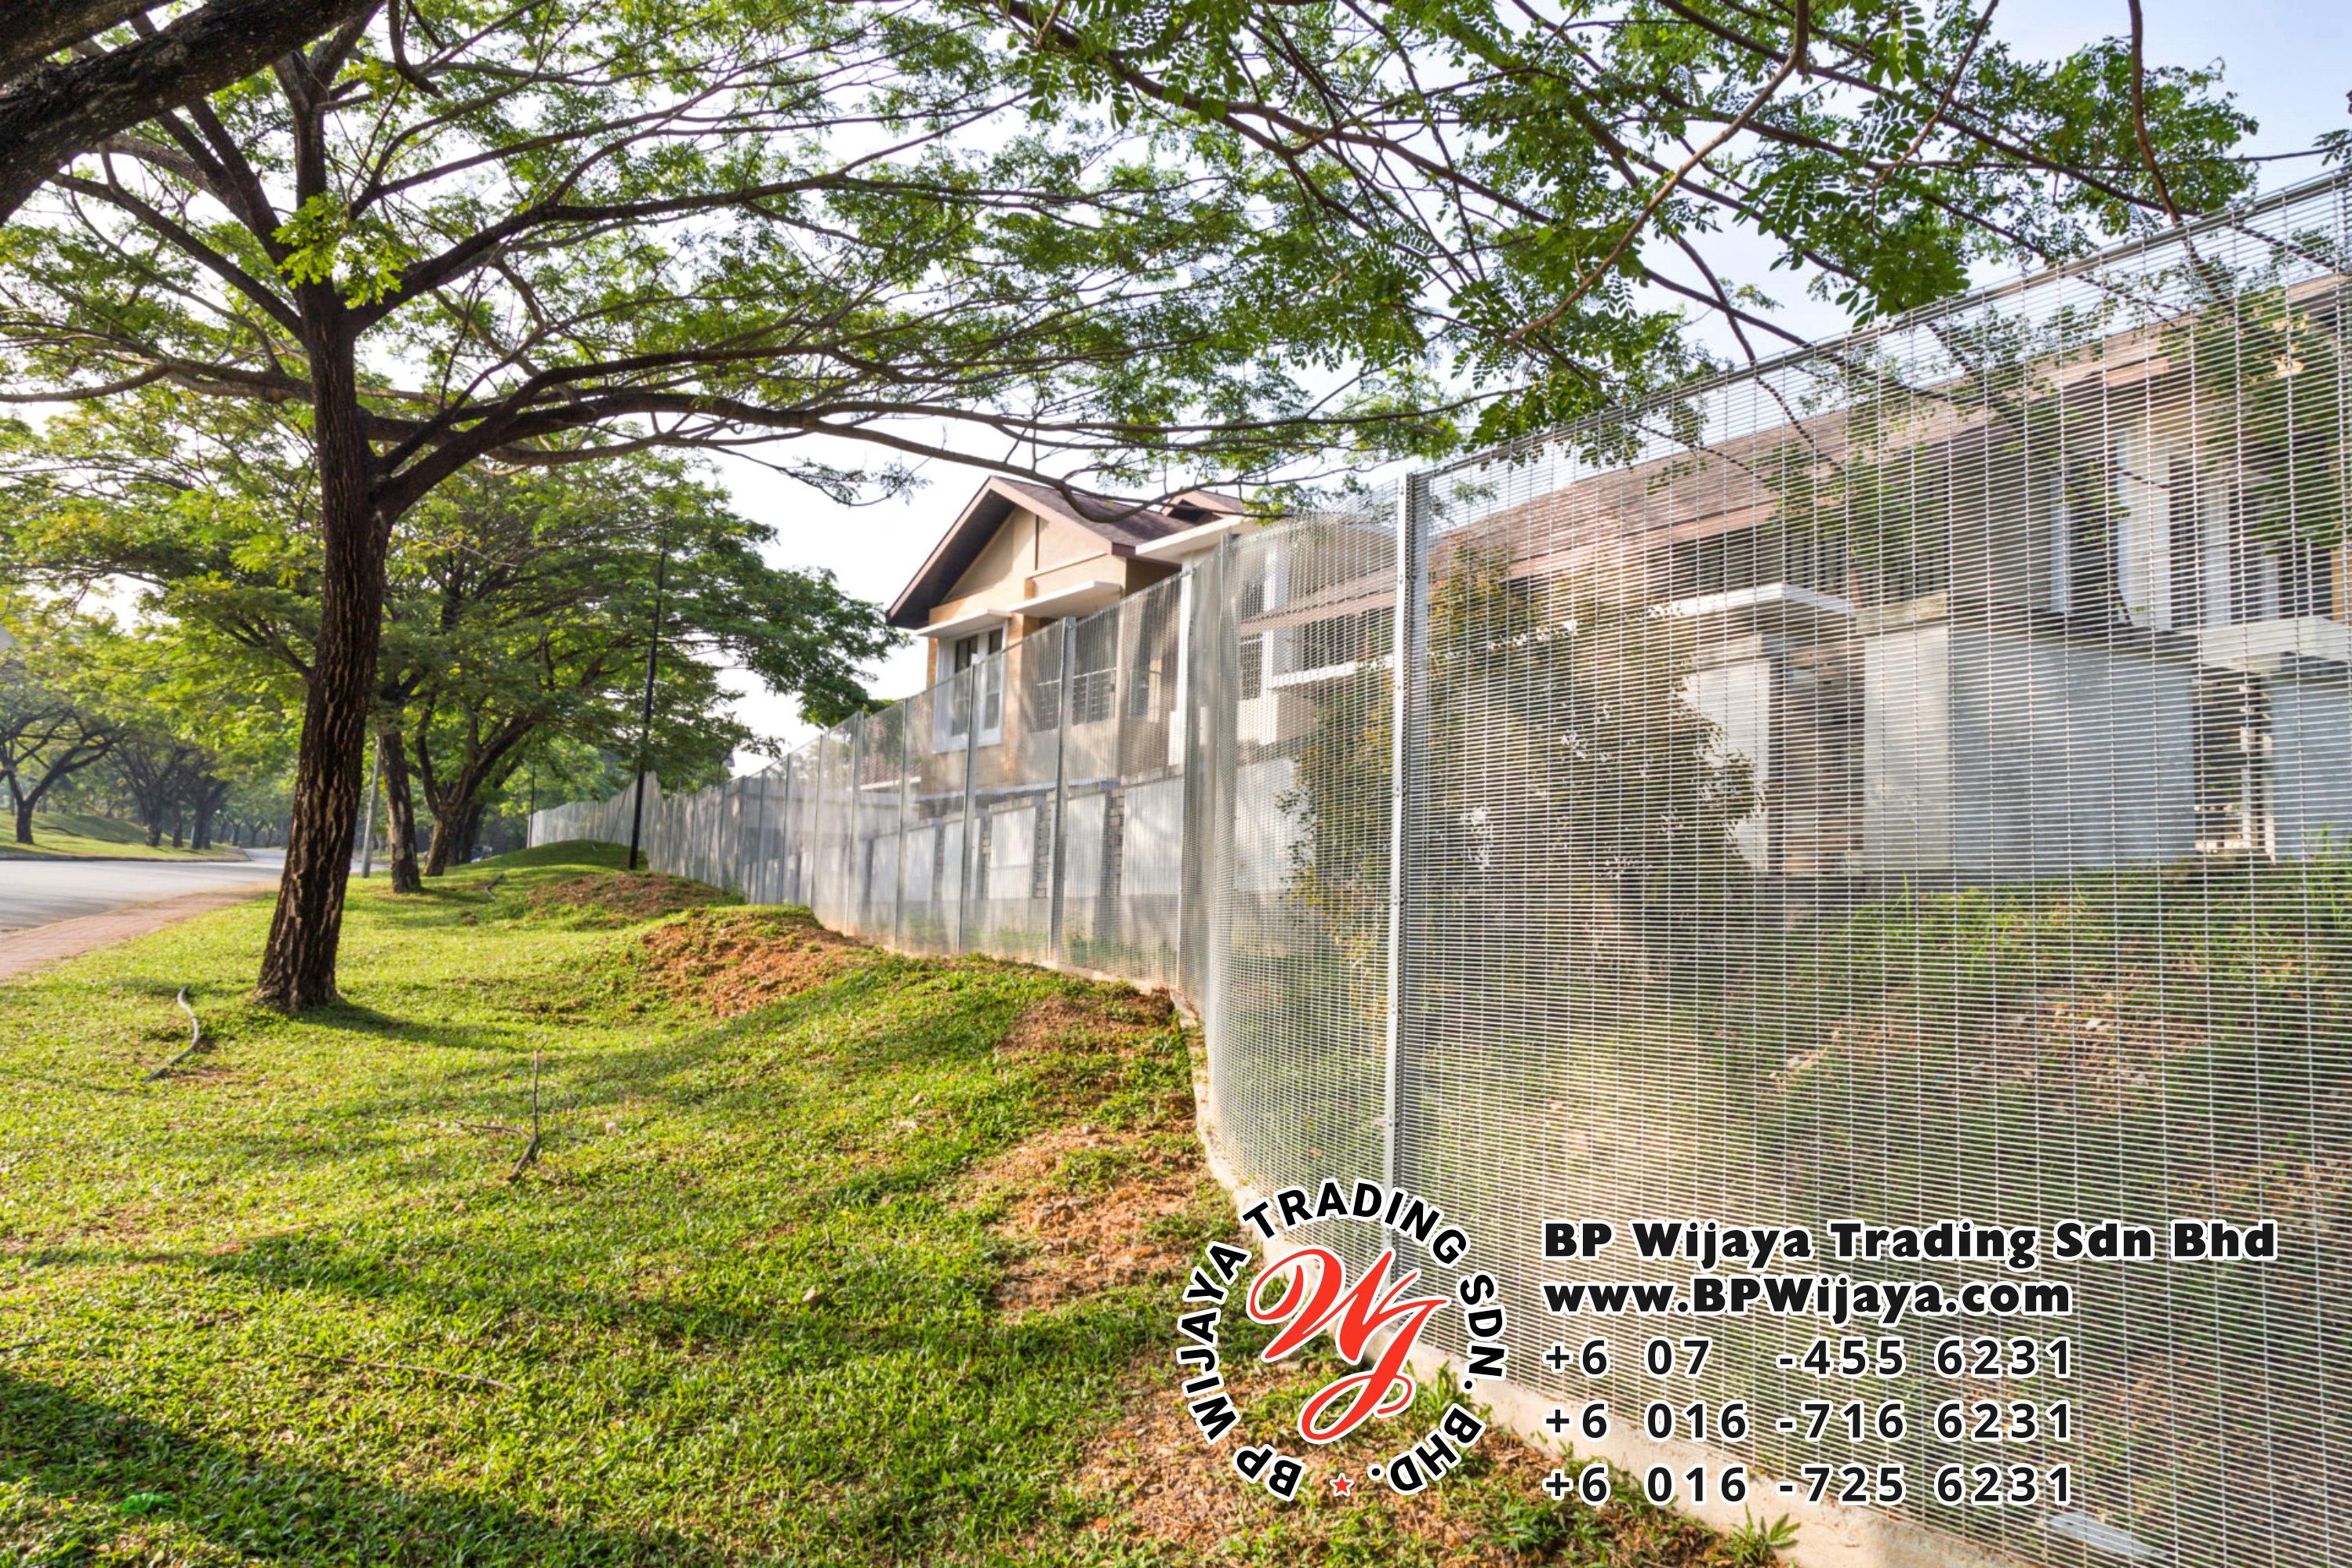 BP Wijaya Trading Sdn Bhd Malaysia Selangor Kuala Lumpur manufacturer of safety fences building materials for housing construction site Security fencing factory security home security A01-04